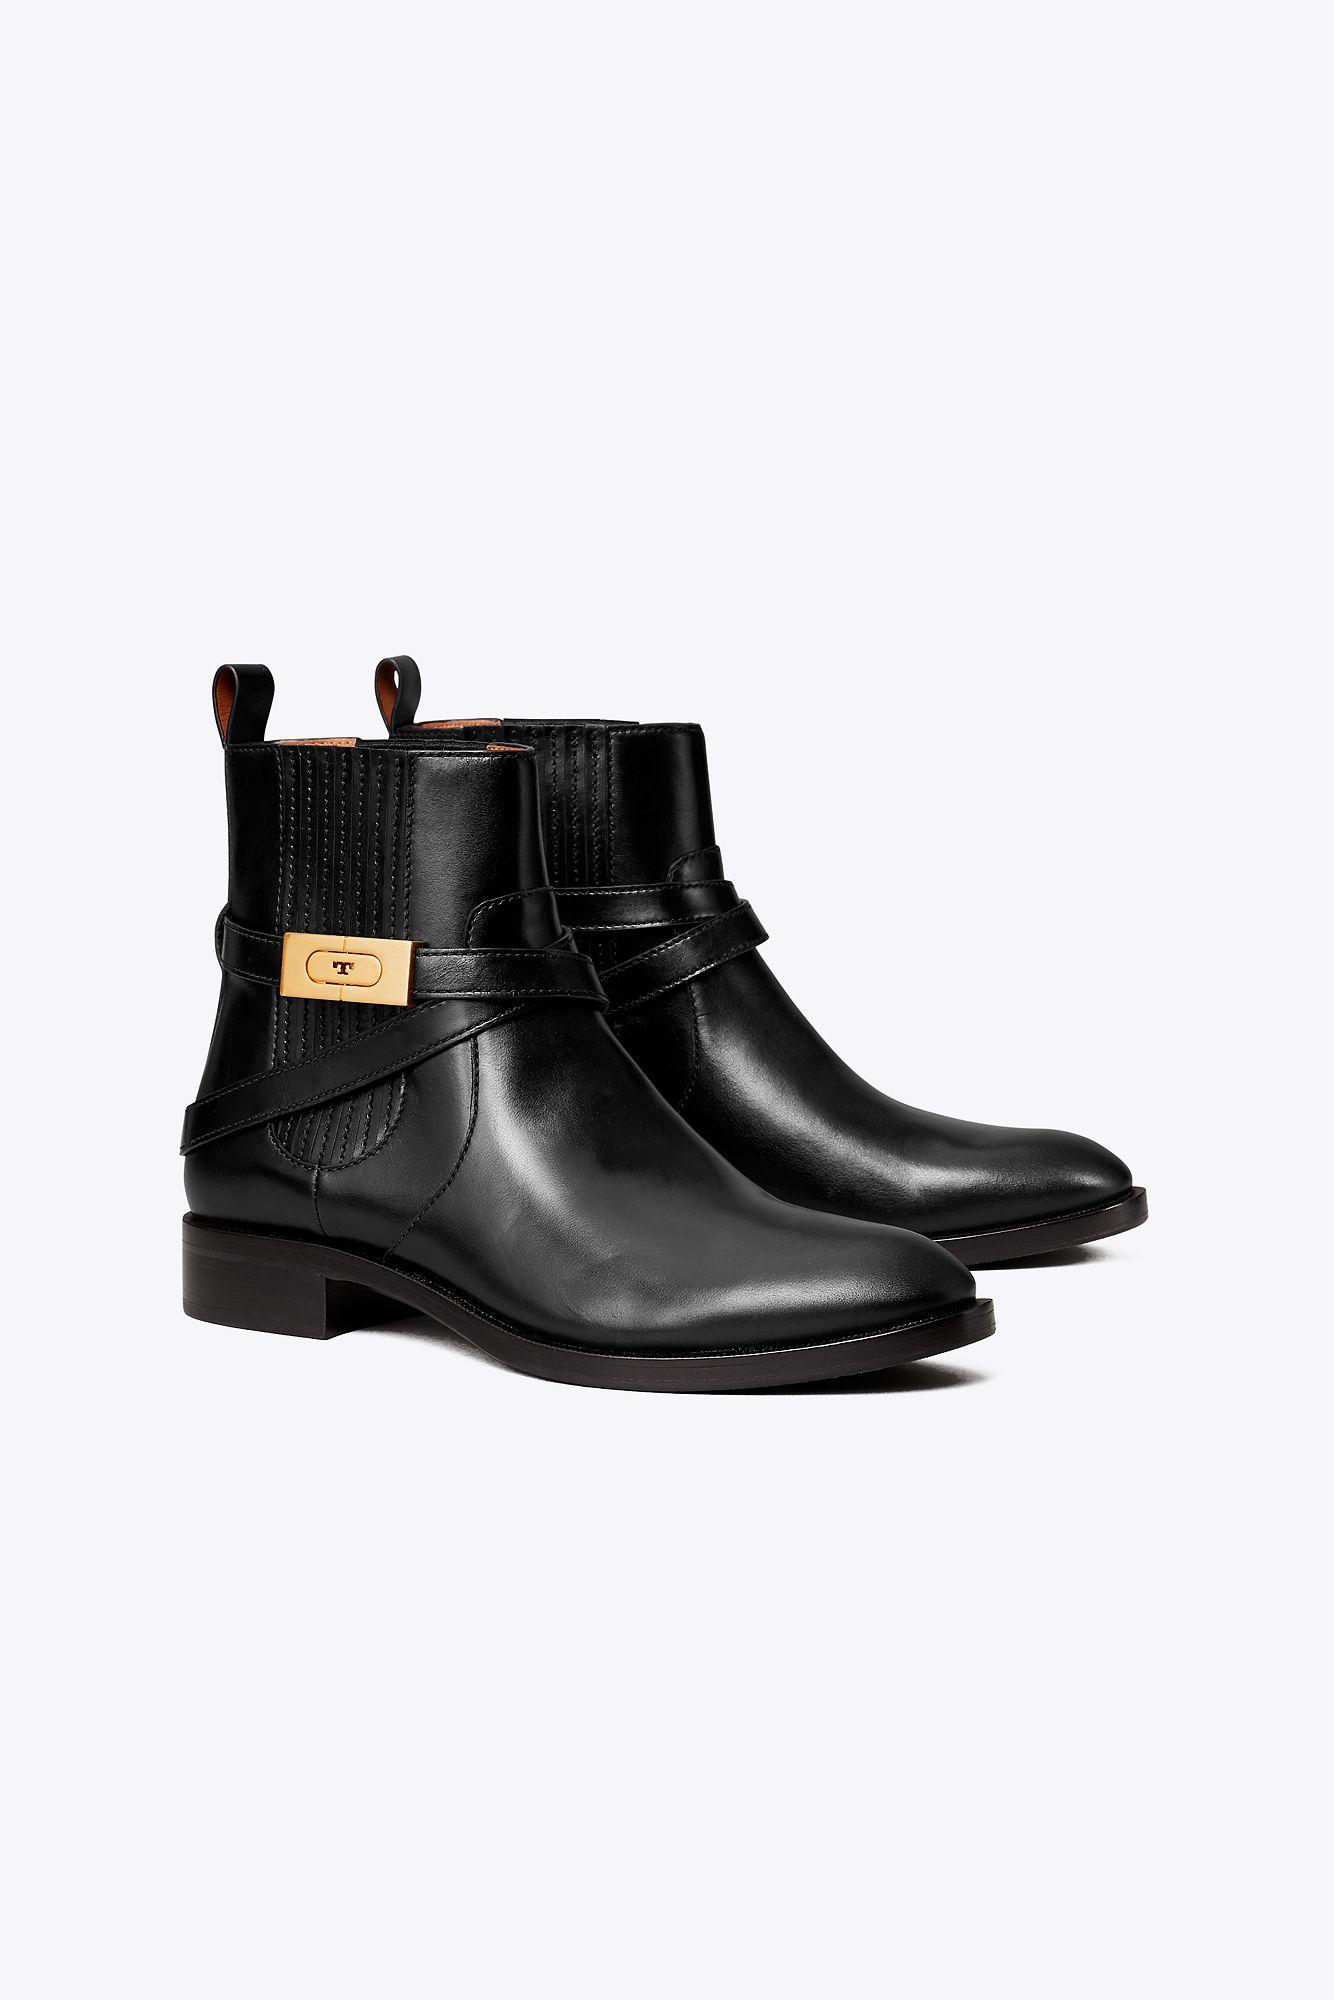 Tory Burch T-hardware Chelsea Boot in Black | Lyst